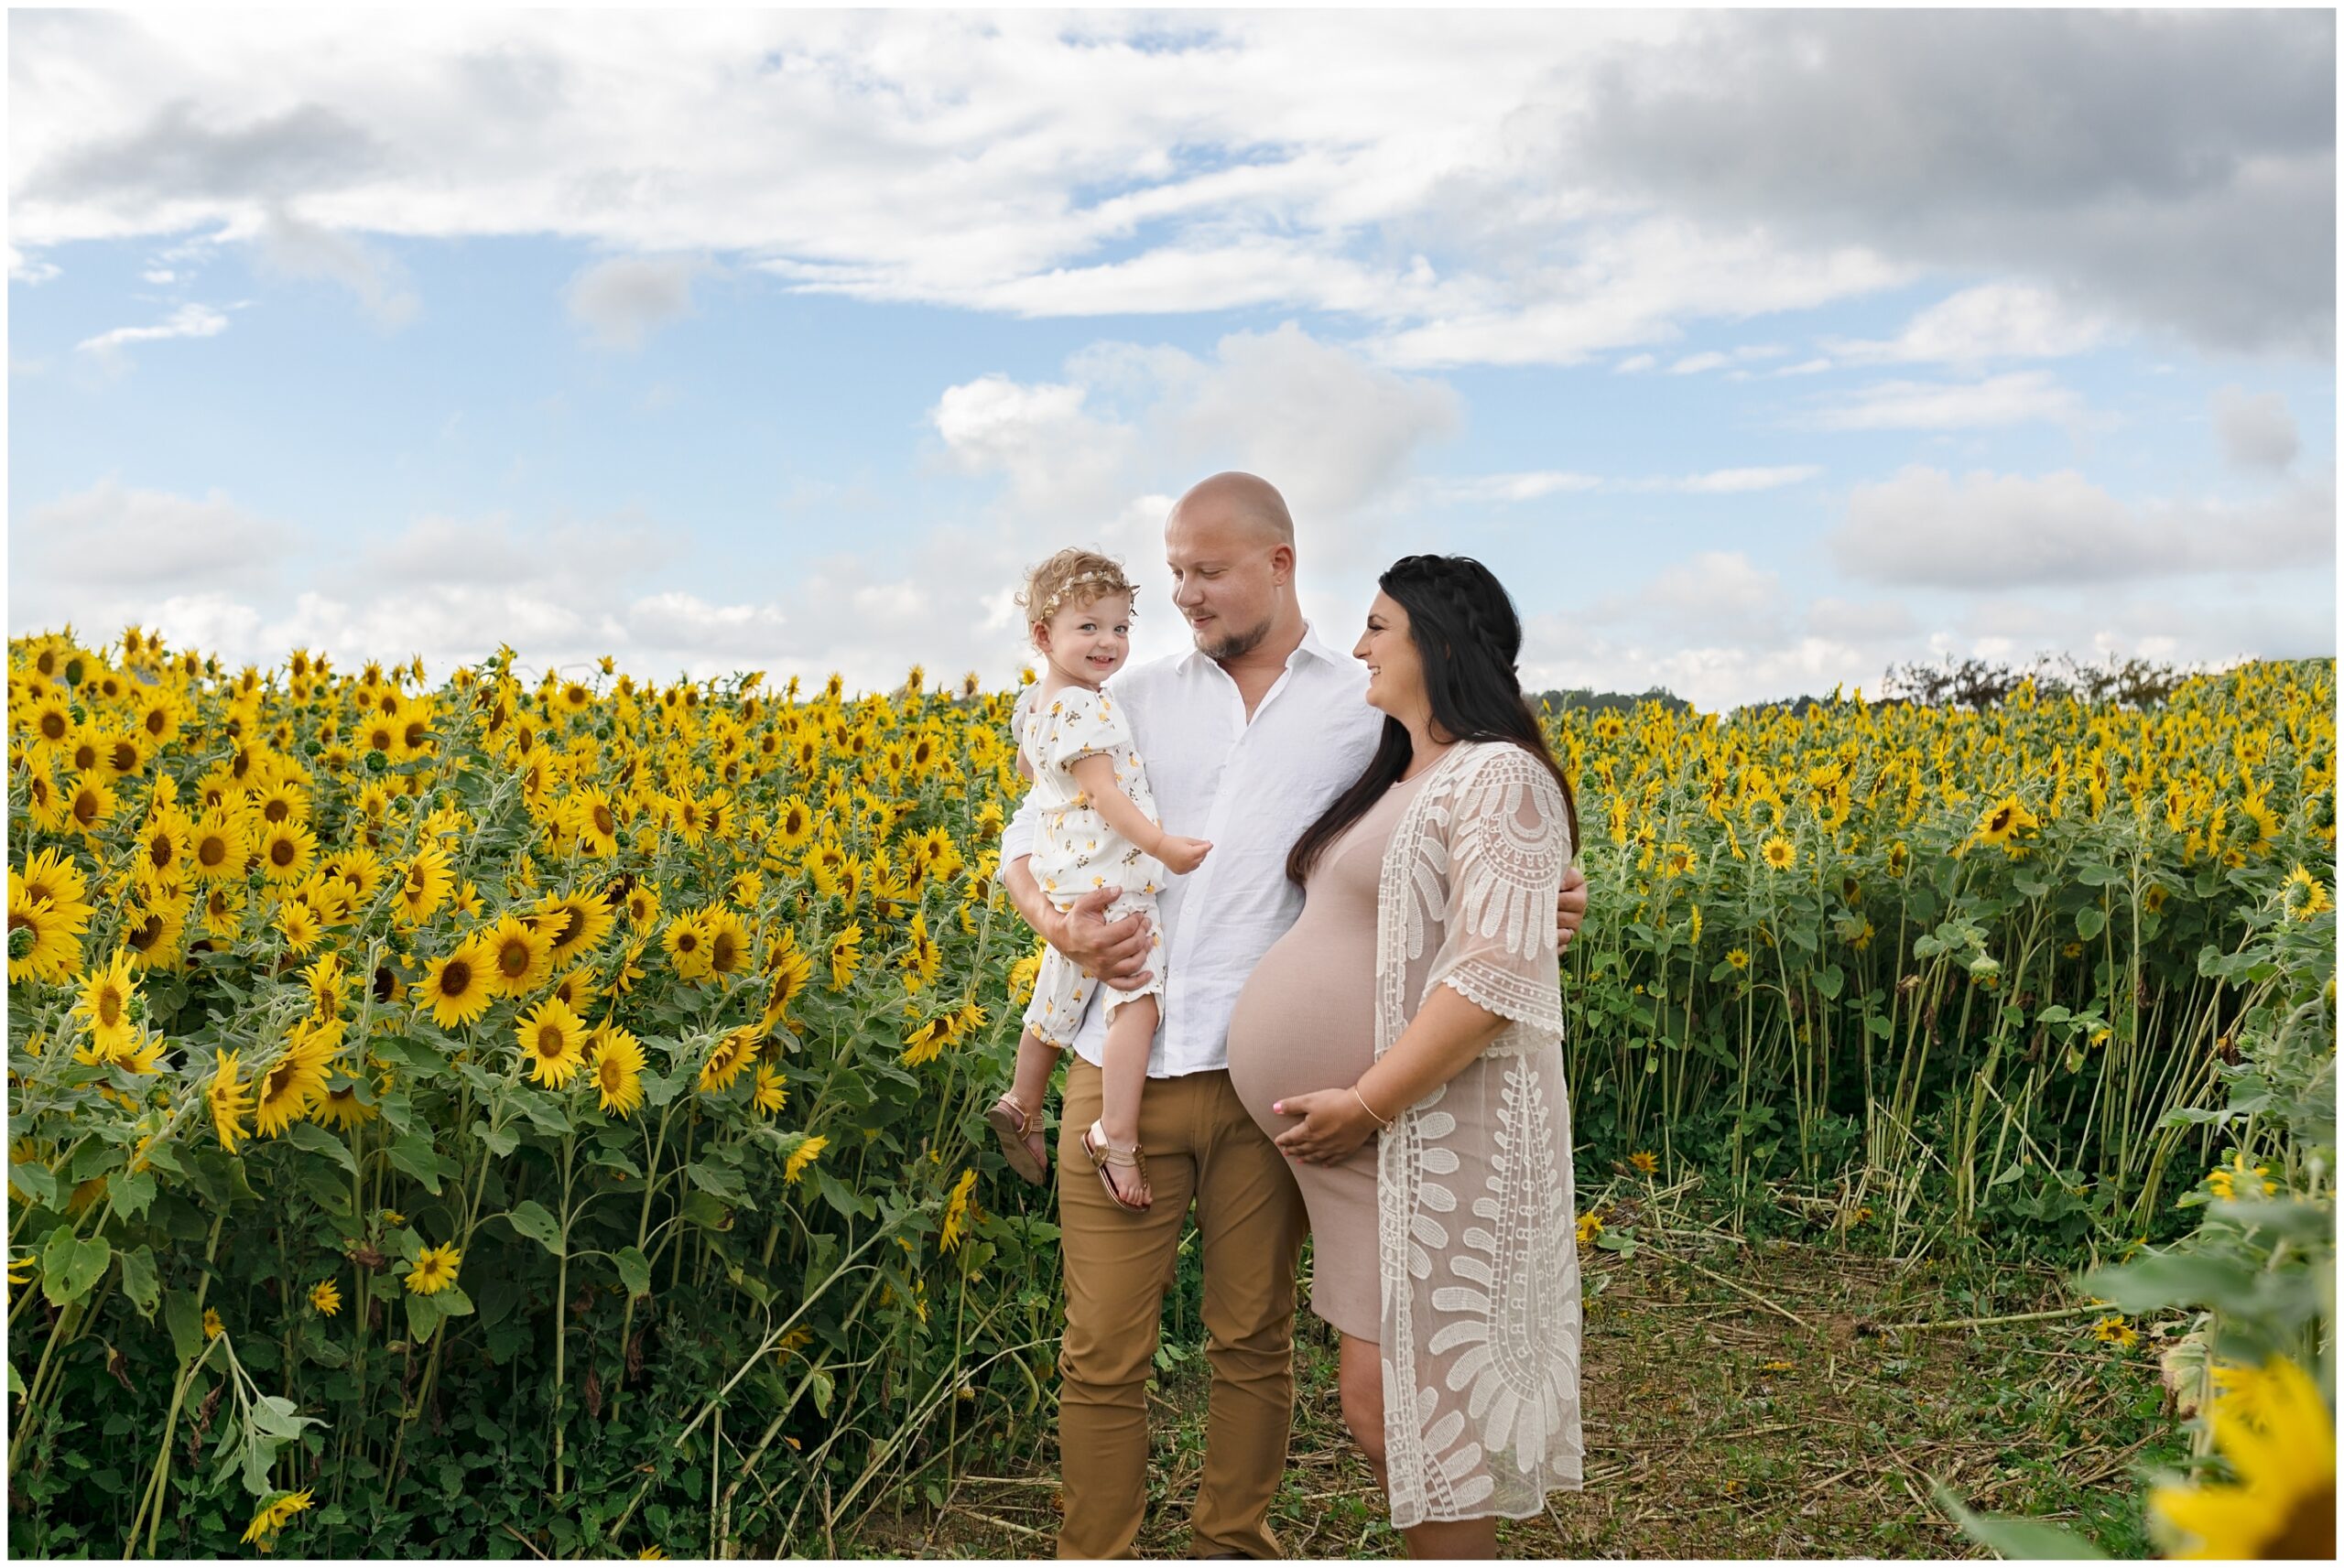 Sunflower Field Family Portrait Session, Sunflower Mini Session at Renshaw Farms in Freeport PA by Pittsburgh Family Photographer Acevedo Weddings